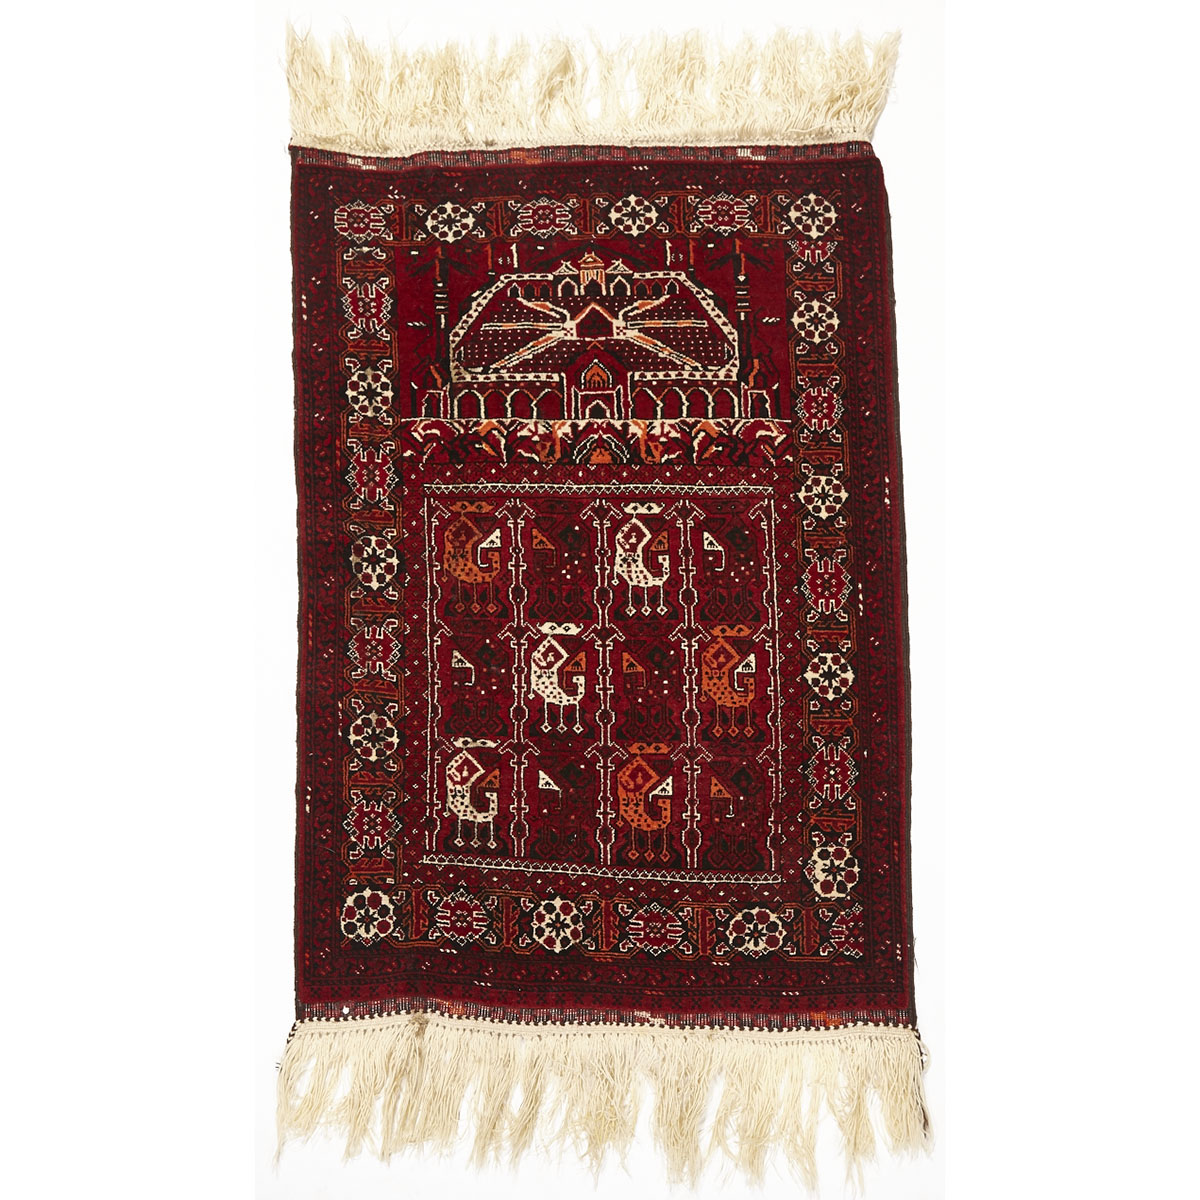 Indo Bokhara Rug together with a Afghan Prayer Rug, mid. 20th century